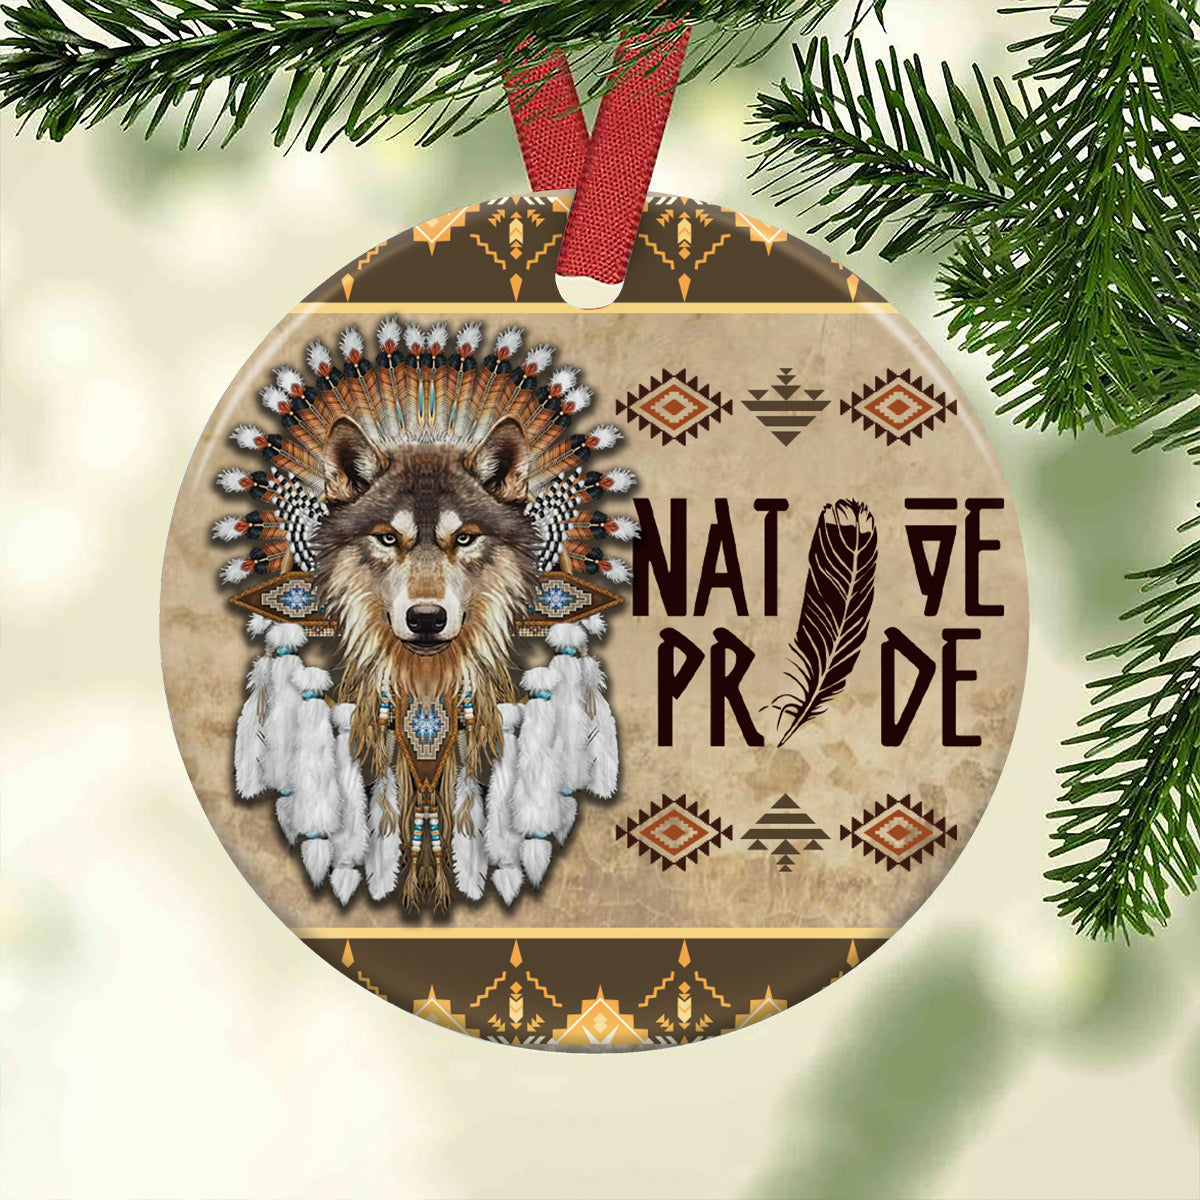 Native American Wolf Native Pride American Indian - Round Aluminium Ornament (Printed On Both Sides) 1122